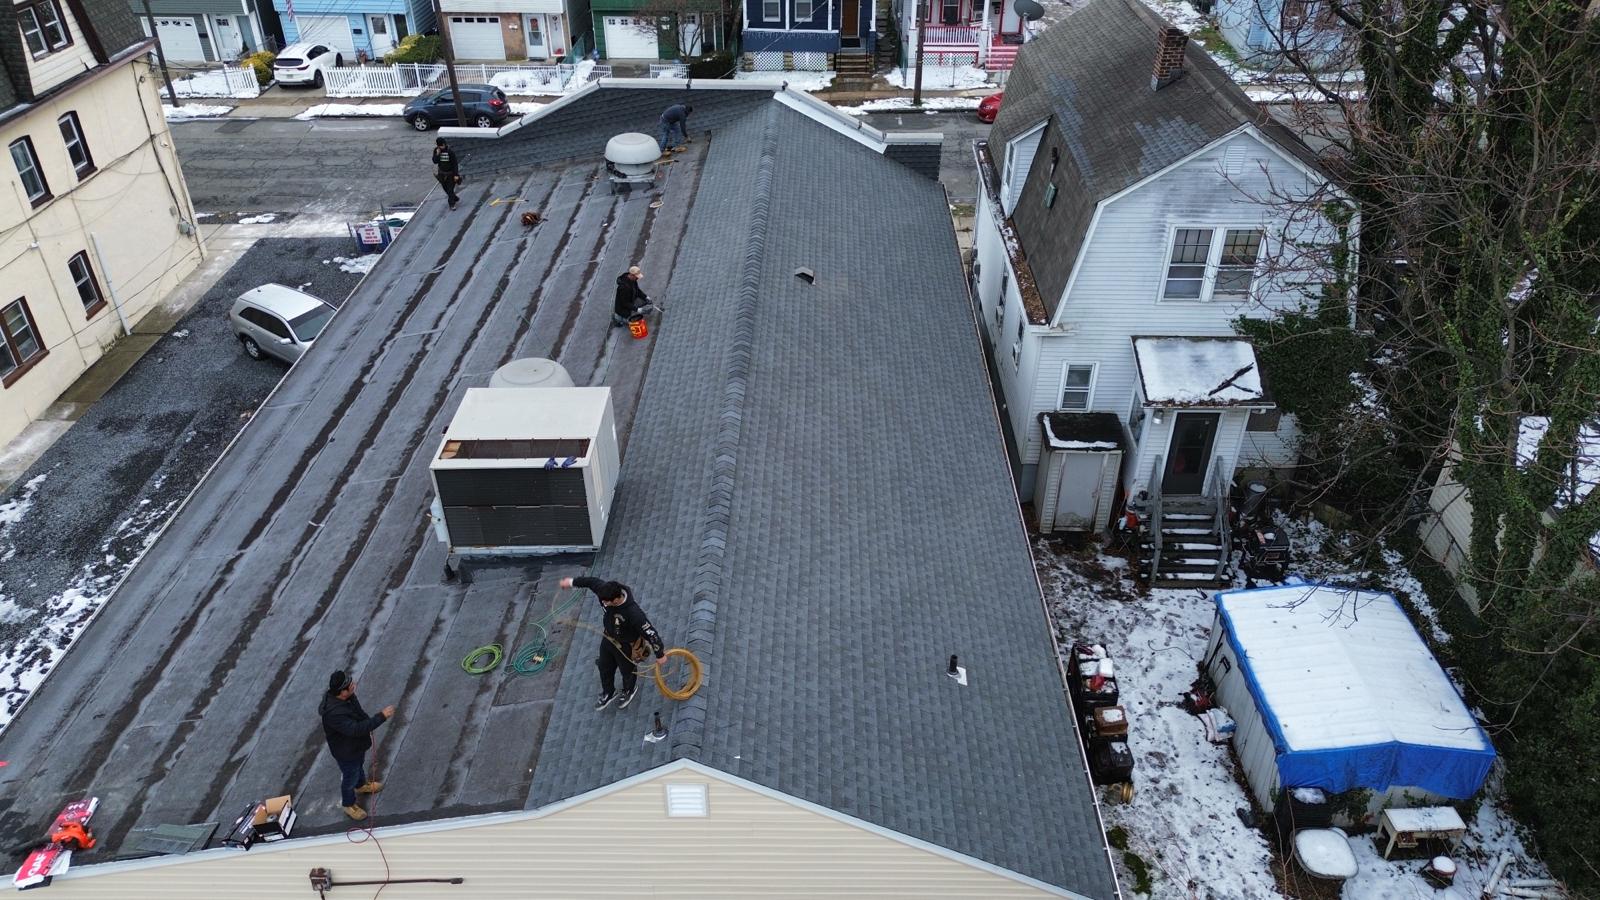 New Roof Installation in Perth Amboy NJ Project Shot 17